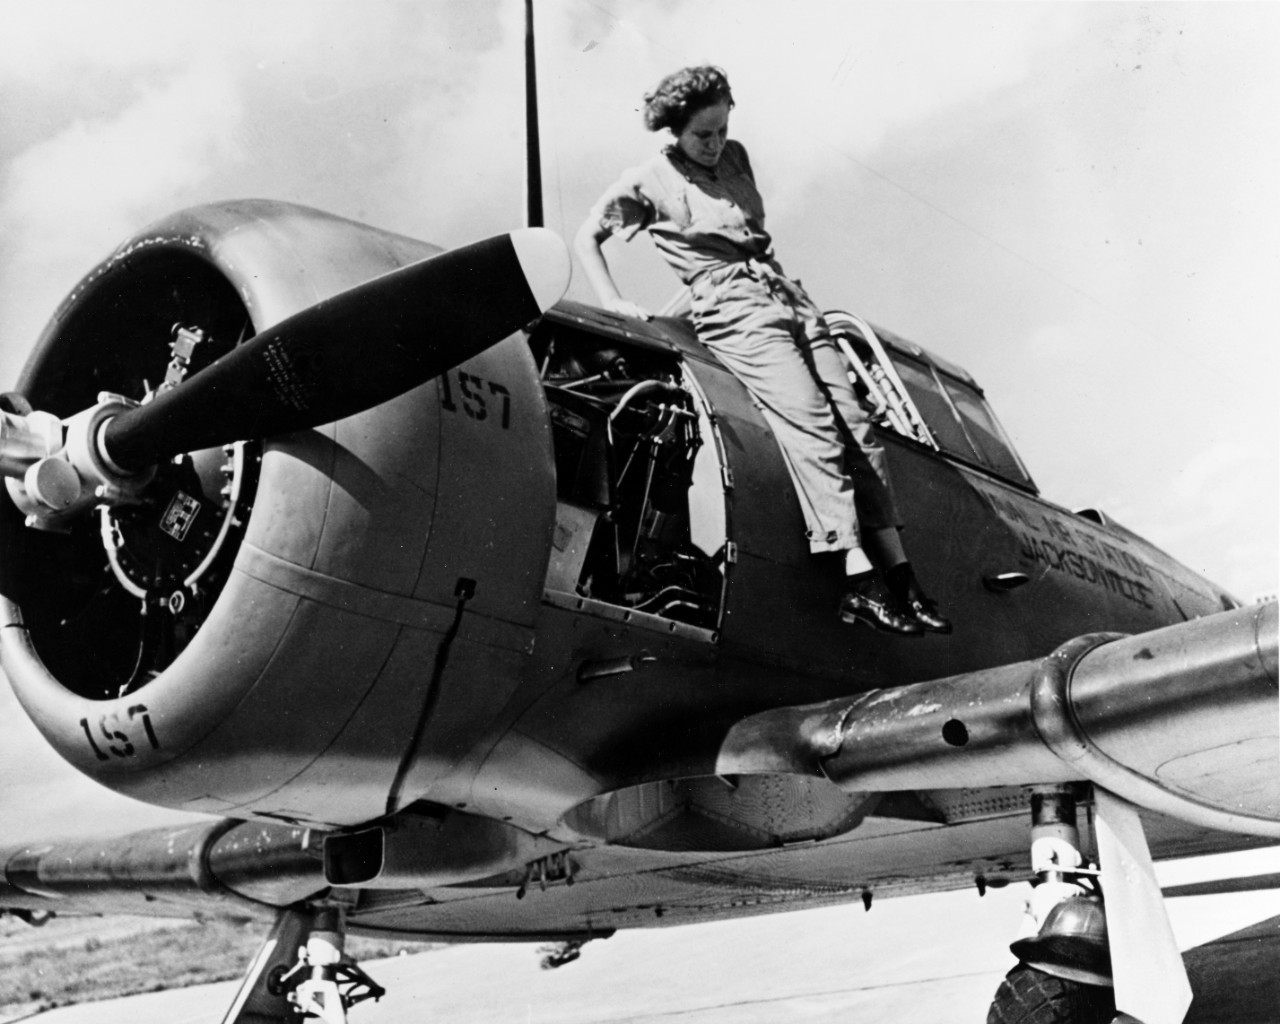 Photo #: 80-G-43590  Aviation Machinist's Mate Mary Arnold, USNR(W)